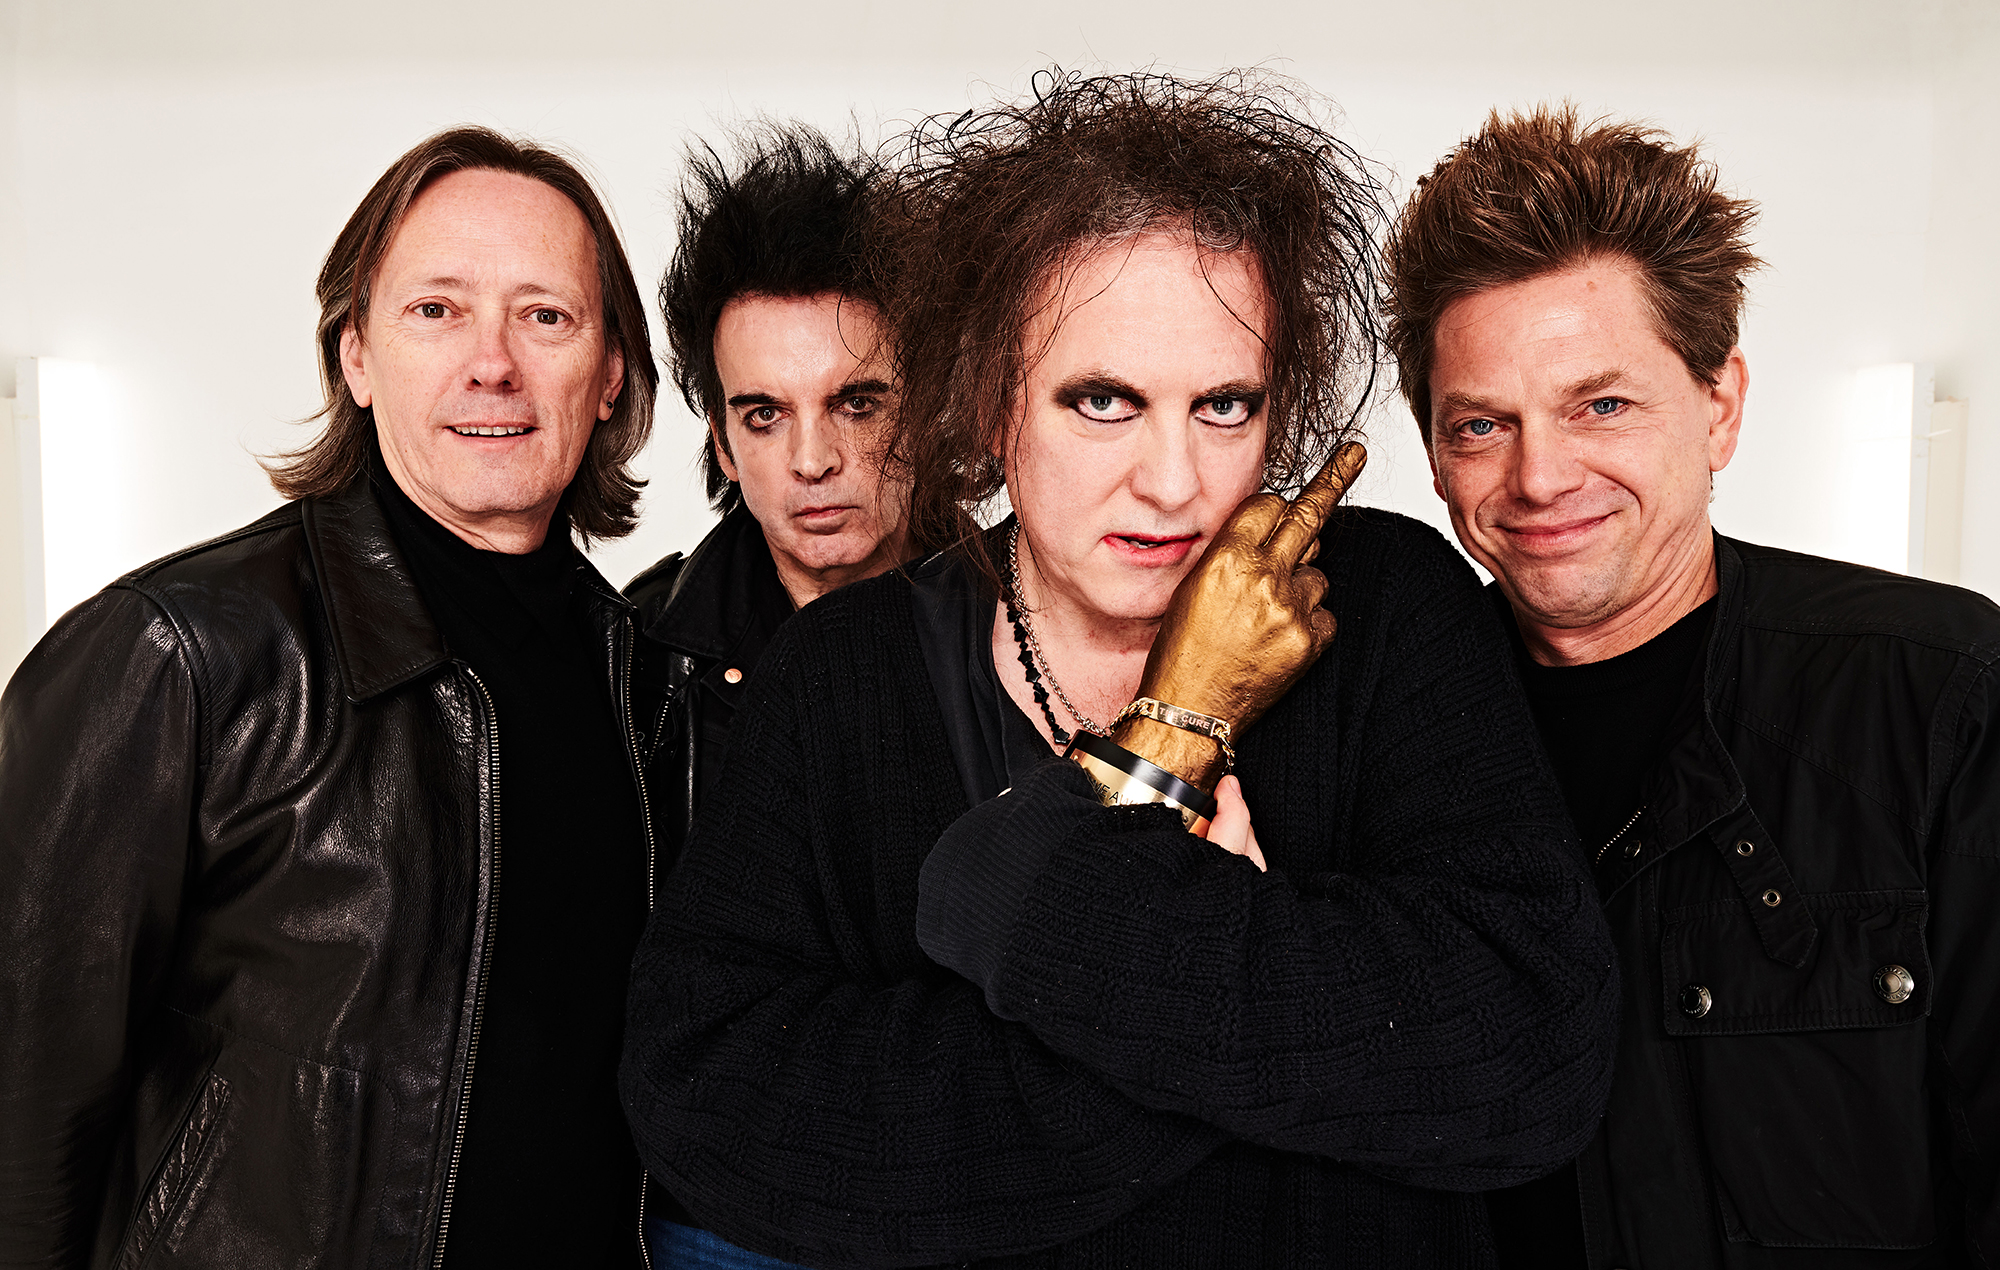 The Cure Announce UK/Europe 2022 Tour, Hints for New Album FIB